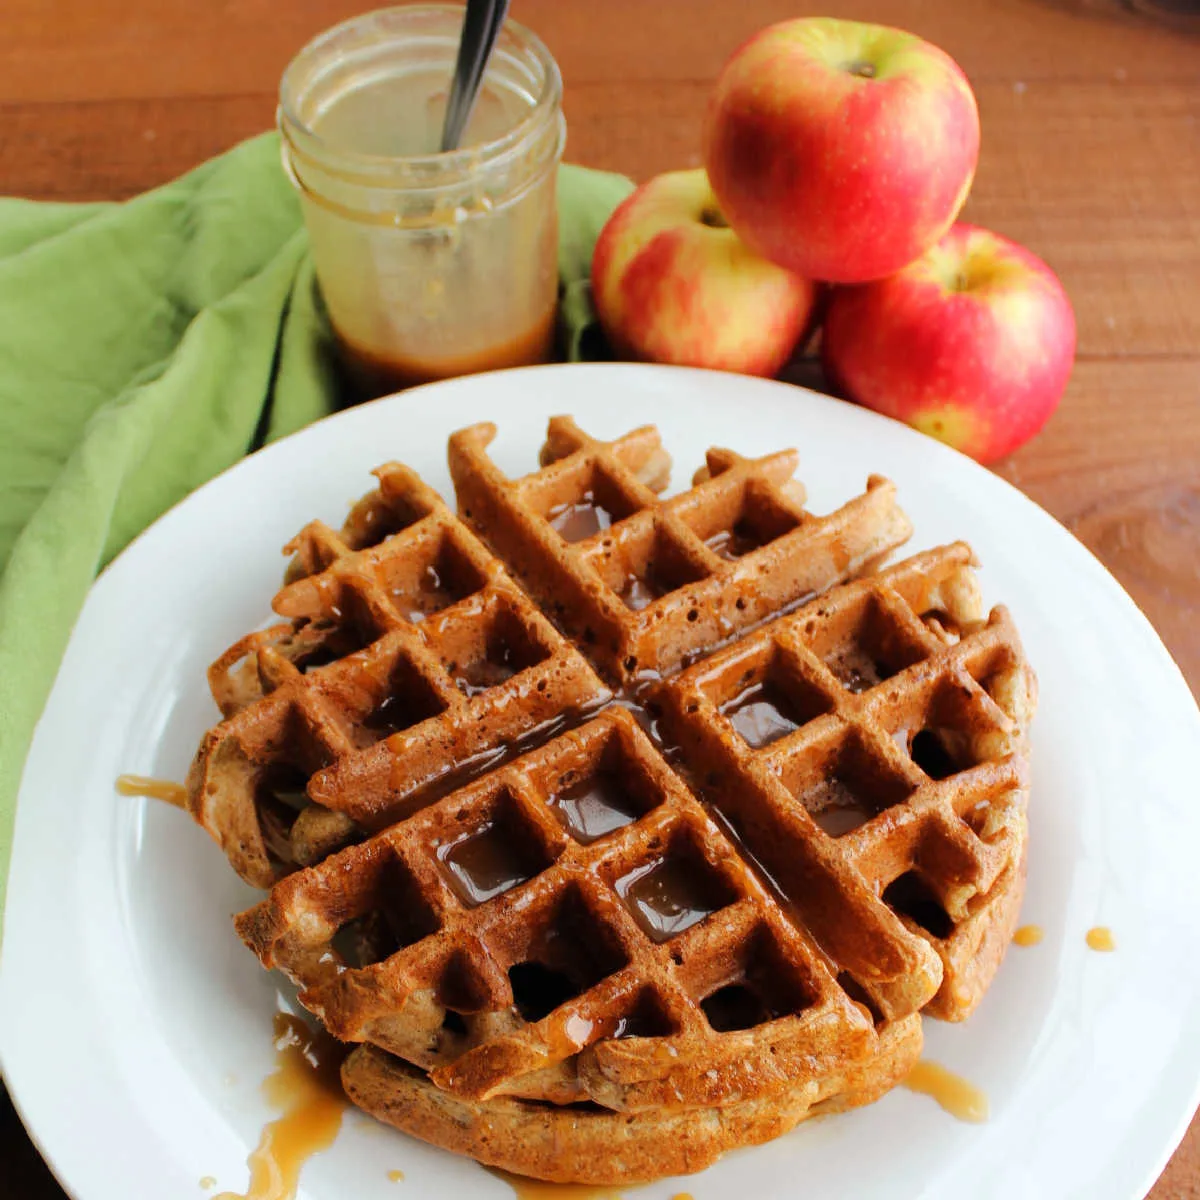 Apple cider belgian waffles drizzled with caramel next to a pile of fresh apples.